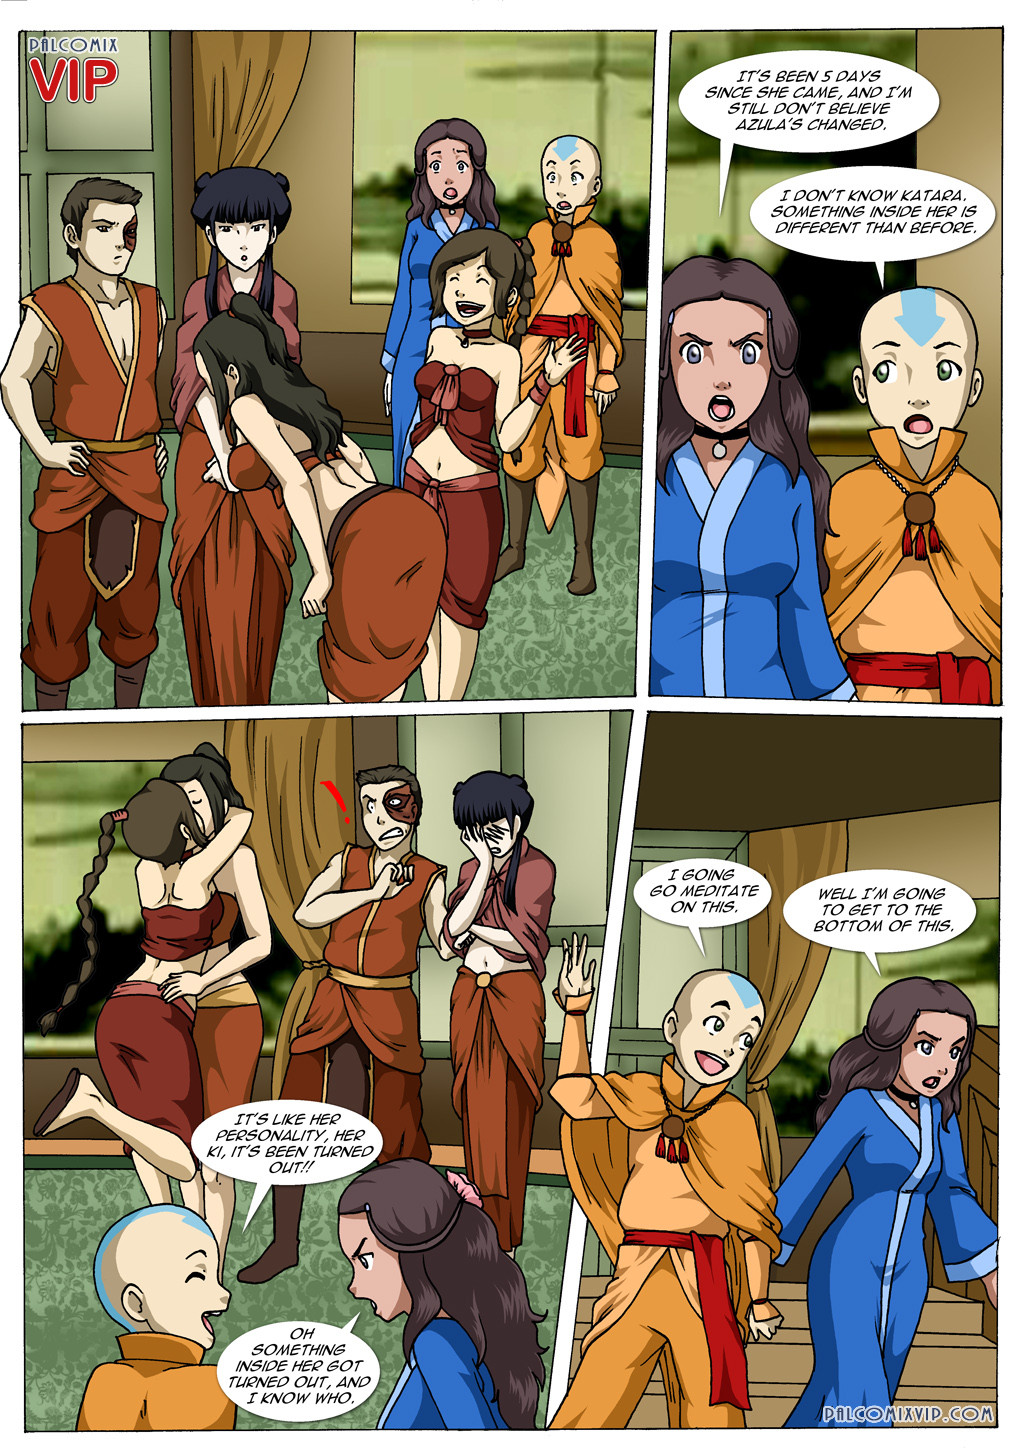 Lumber reccomend Avatar the last airbender hot and naked